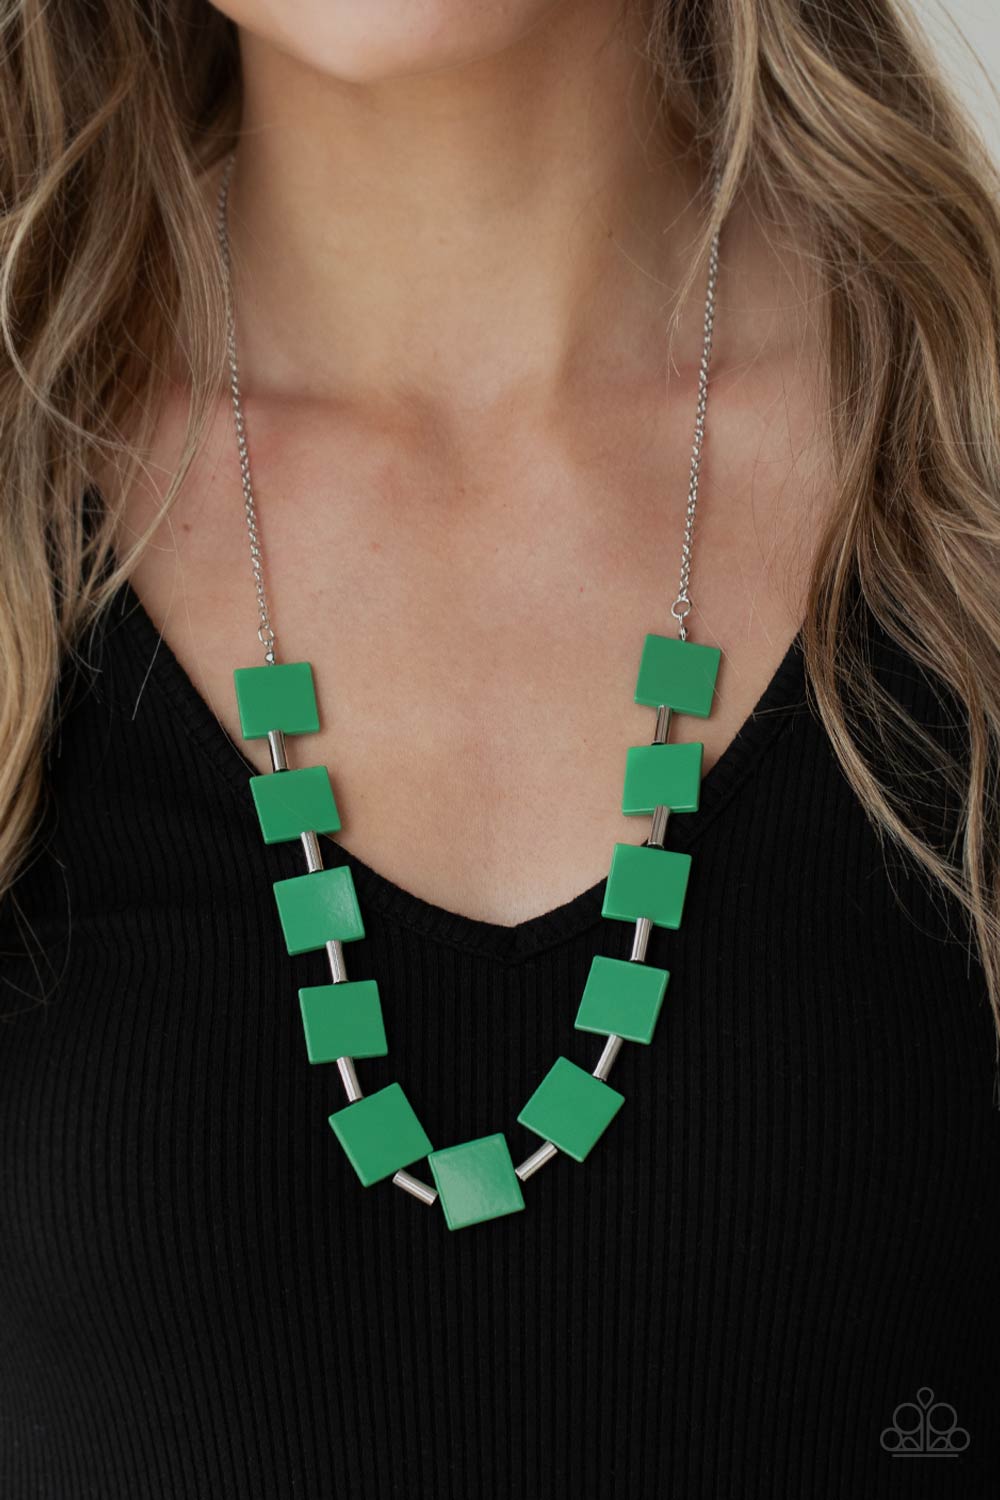 Hello, Material Girl - Green and Silver Necklace - Paparazzi Accessories - Vibrant geometric squares painted in the spring Pantone® of Mint flare out along a long silver chain as it drapes along the chest. Sleek silver cylinders separate the square plates, adding cool metallic accents to the stylish necklace.